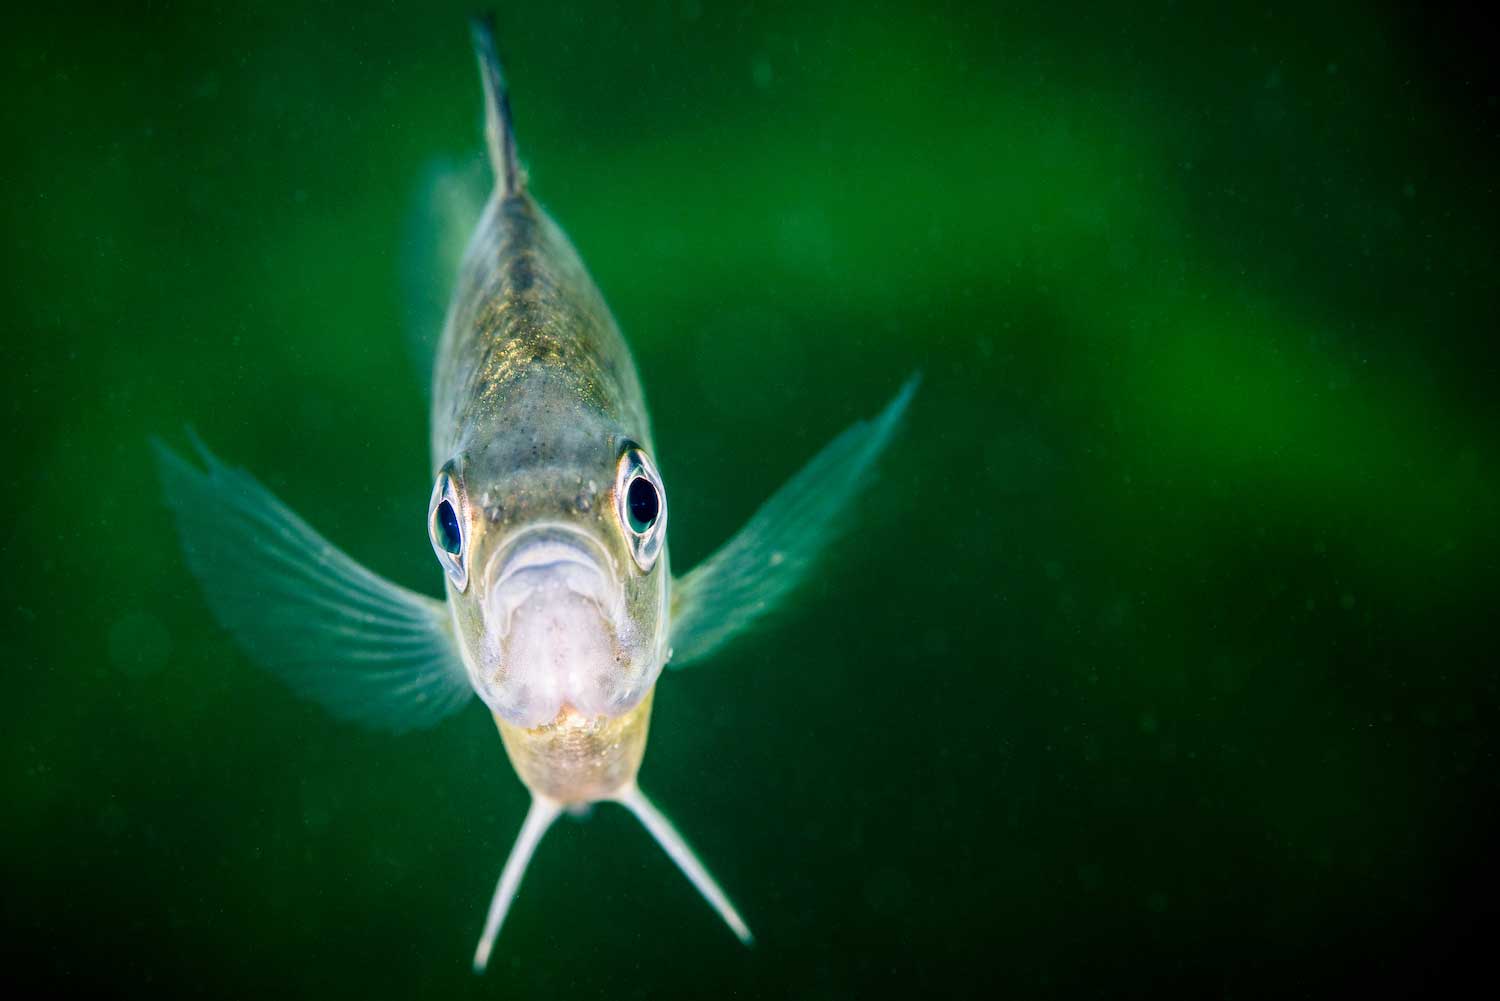 A closeup of a bluegill from underwater.